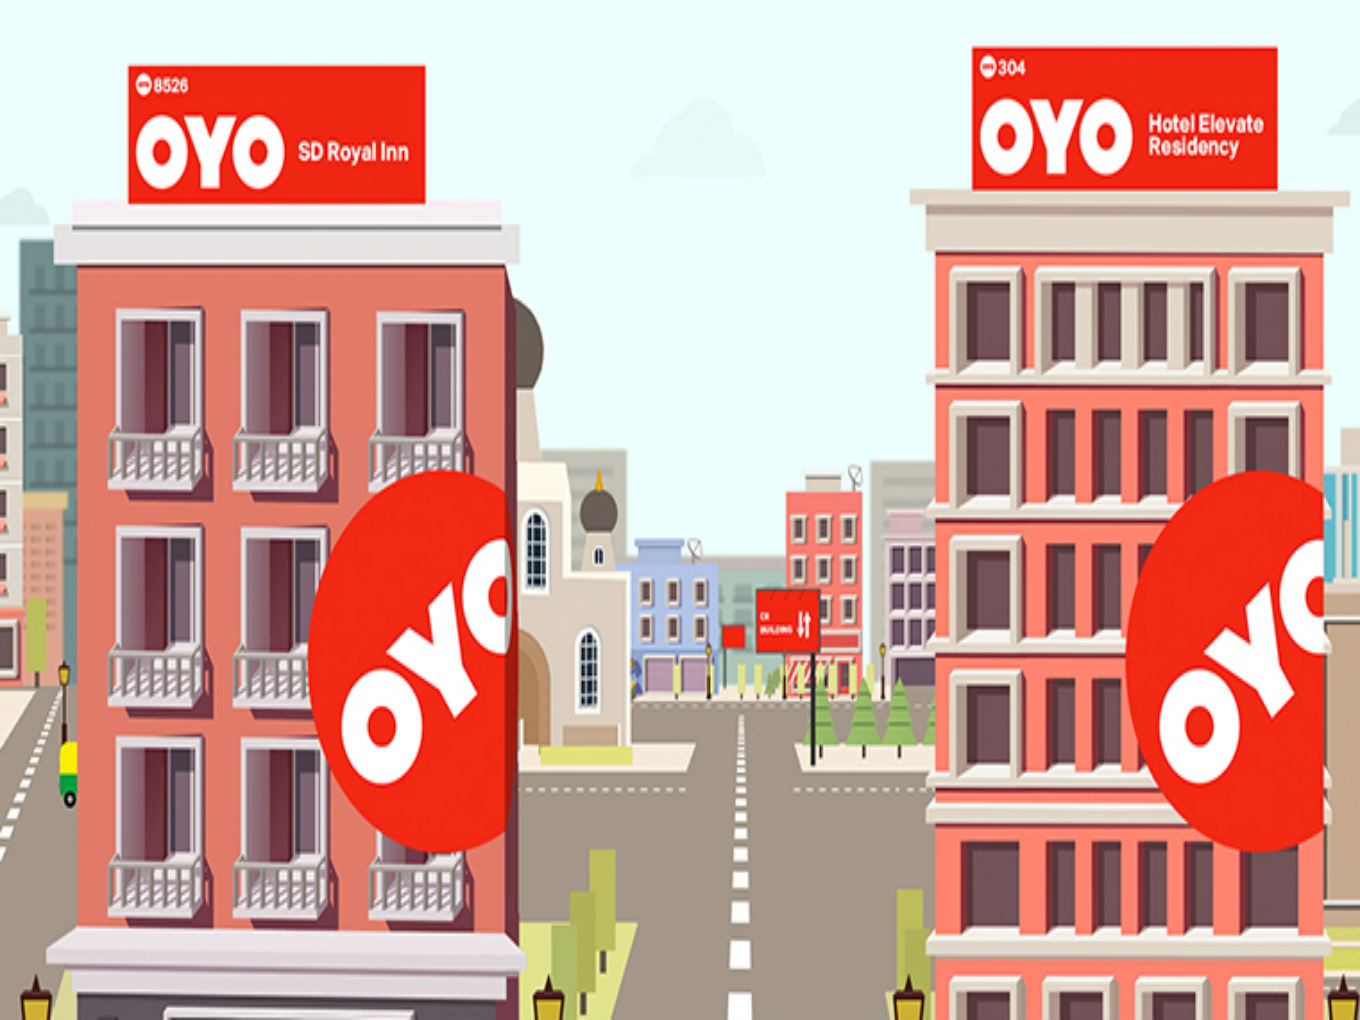 OYO-SoftBank JV Acquires Japanese Apartment Rental Firm For $100 Mn